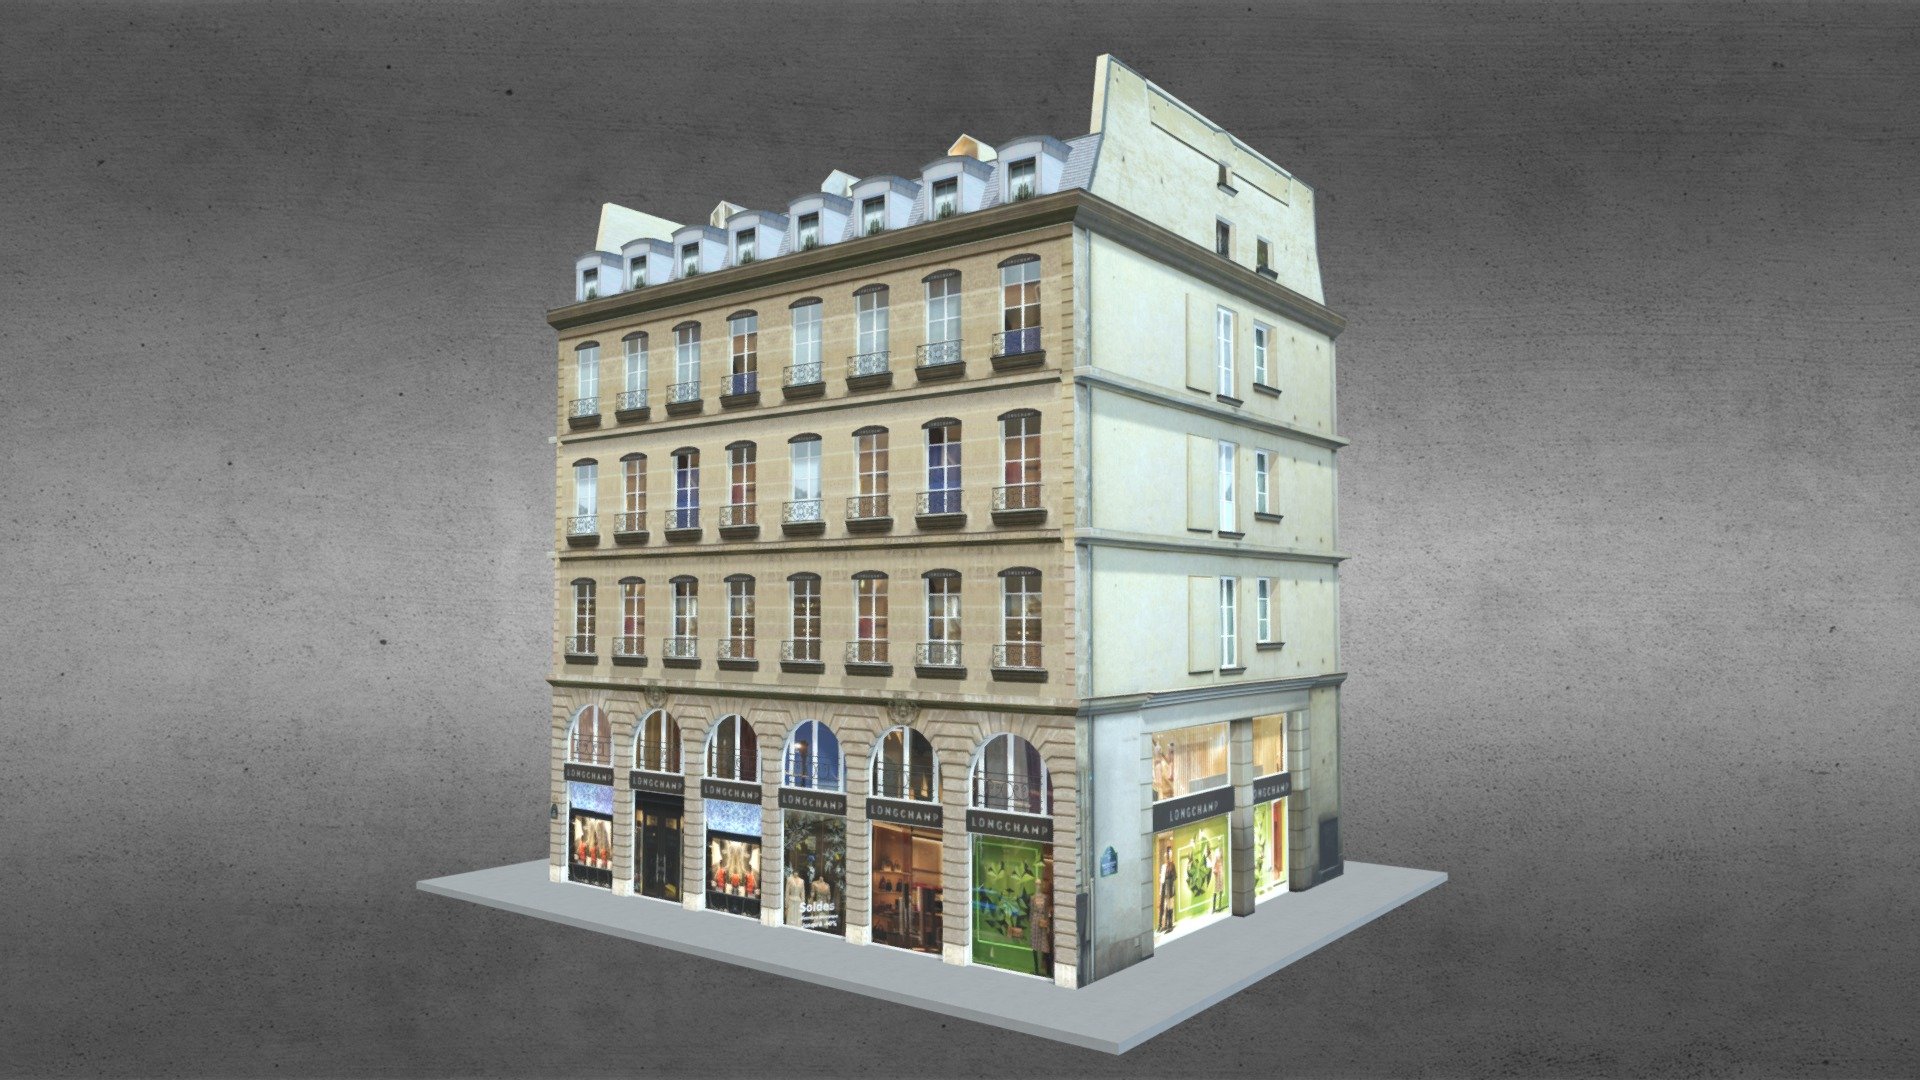 Typical Paris Building 01
Originally created with 3ds Max 2015 and rendered in V-Ray 3.0

Total Poly Counts:
Poly Count = 62106
Vertex Count = 64093 - Typical Paris Building 01 - 3D model by nuralam018 3d model